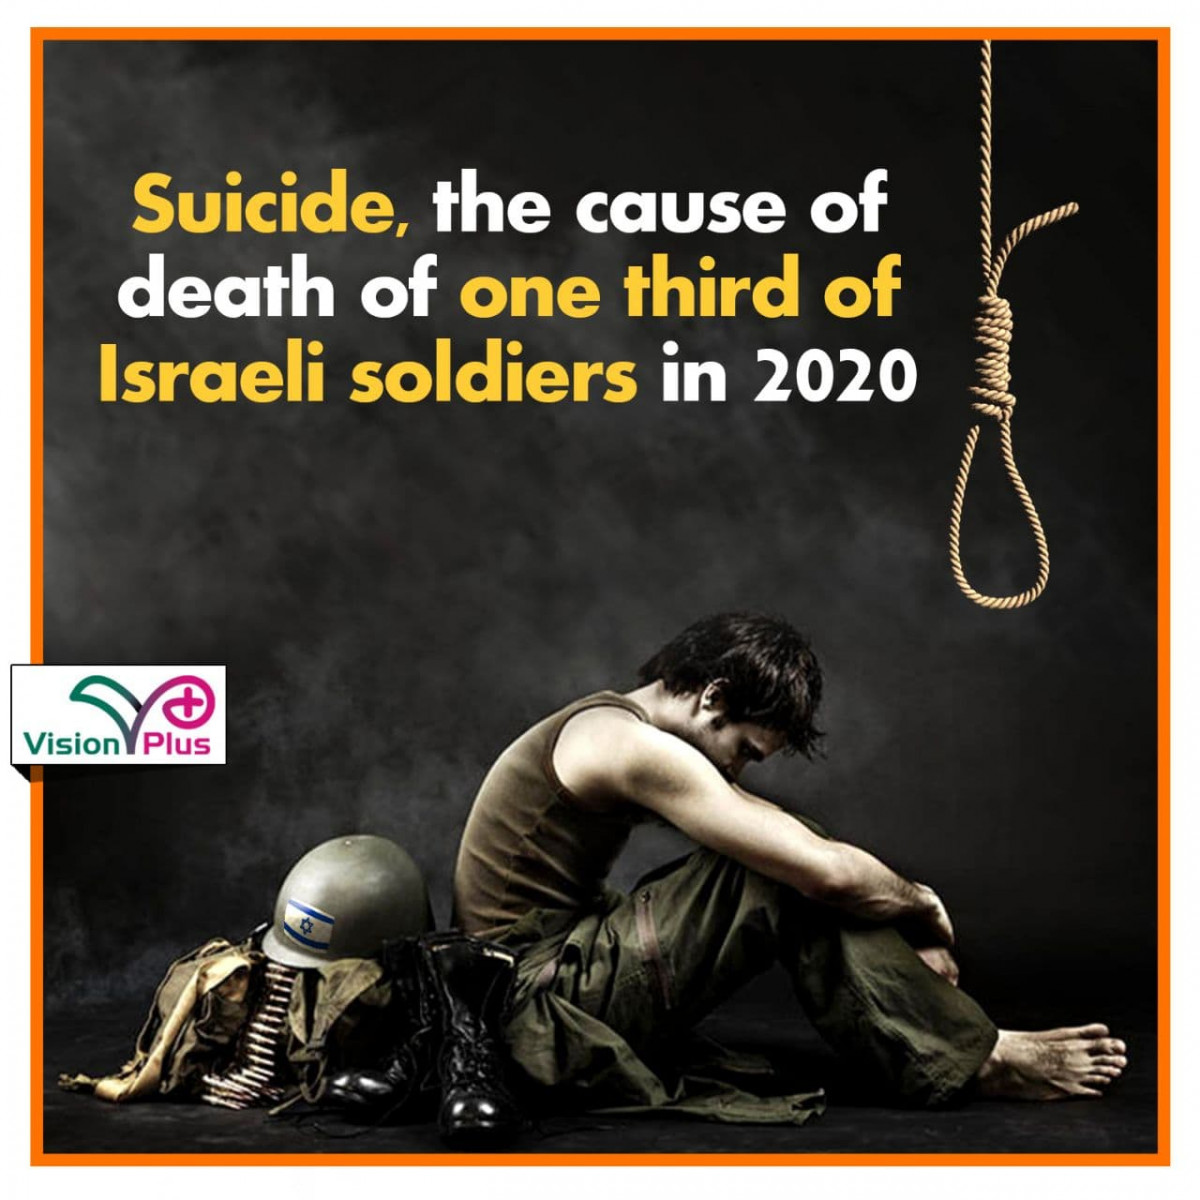 Suicide, the cause of death of one third of Israeli soldiers in 2020